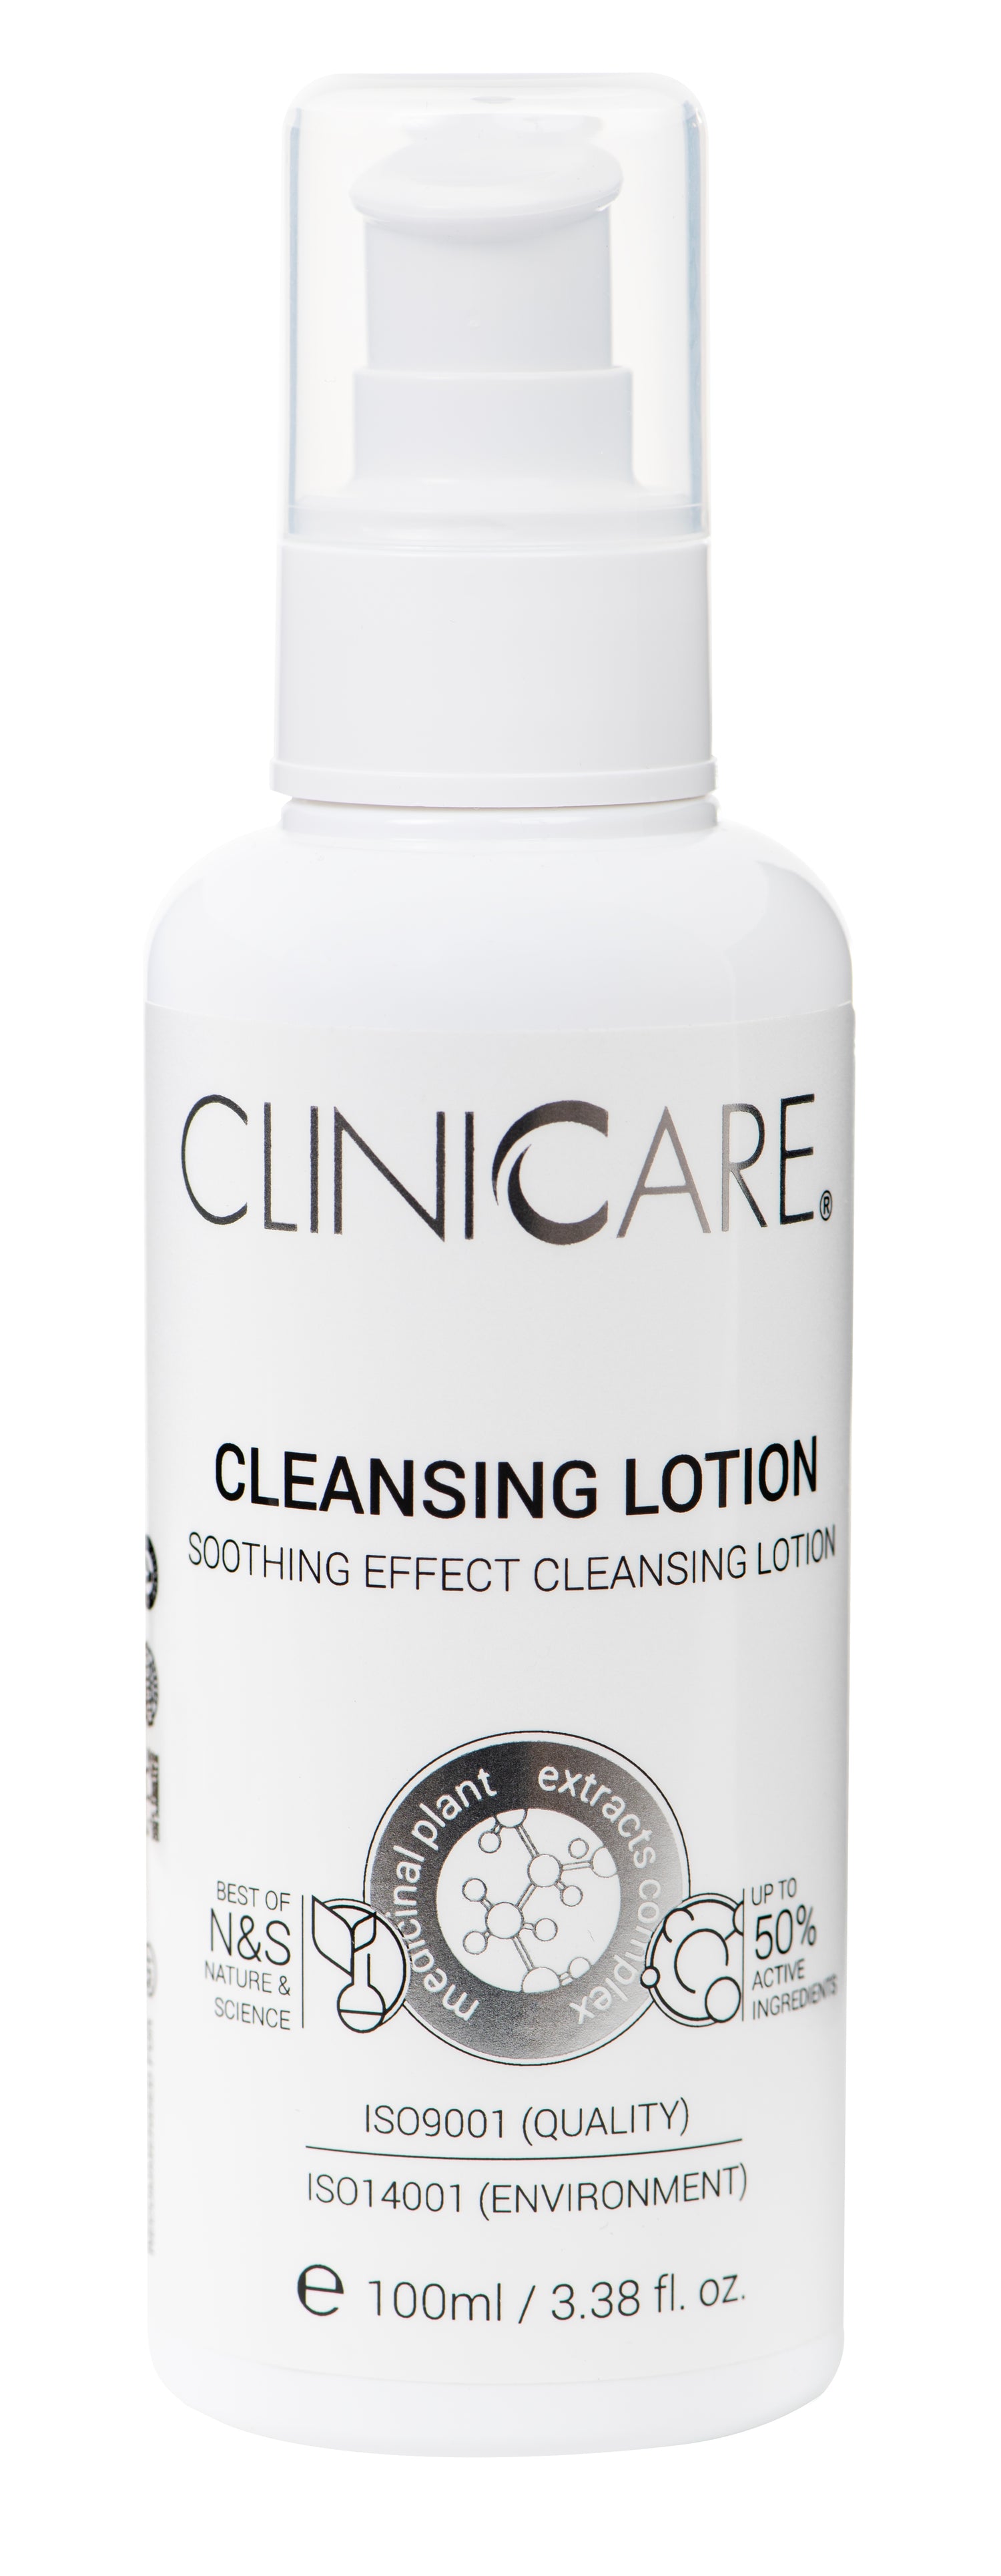 CLEANSING LOTION 100ml-BOTTLE